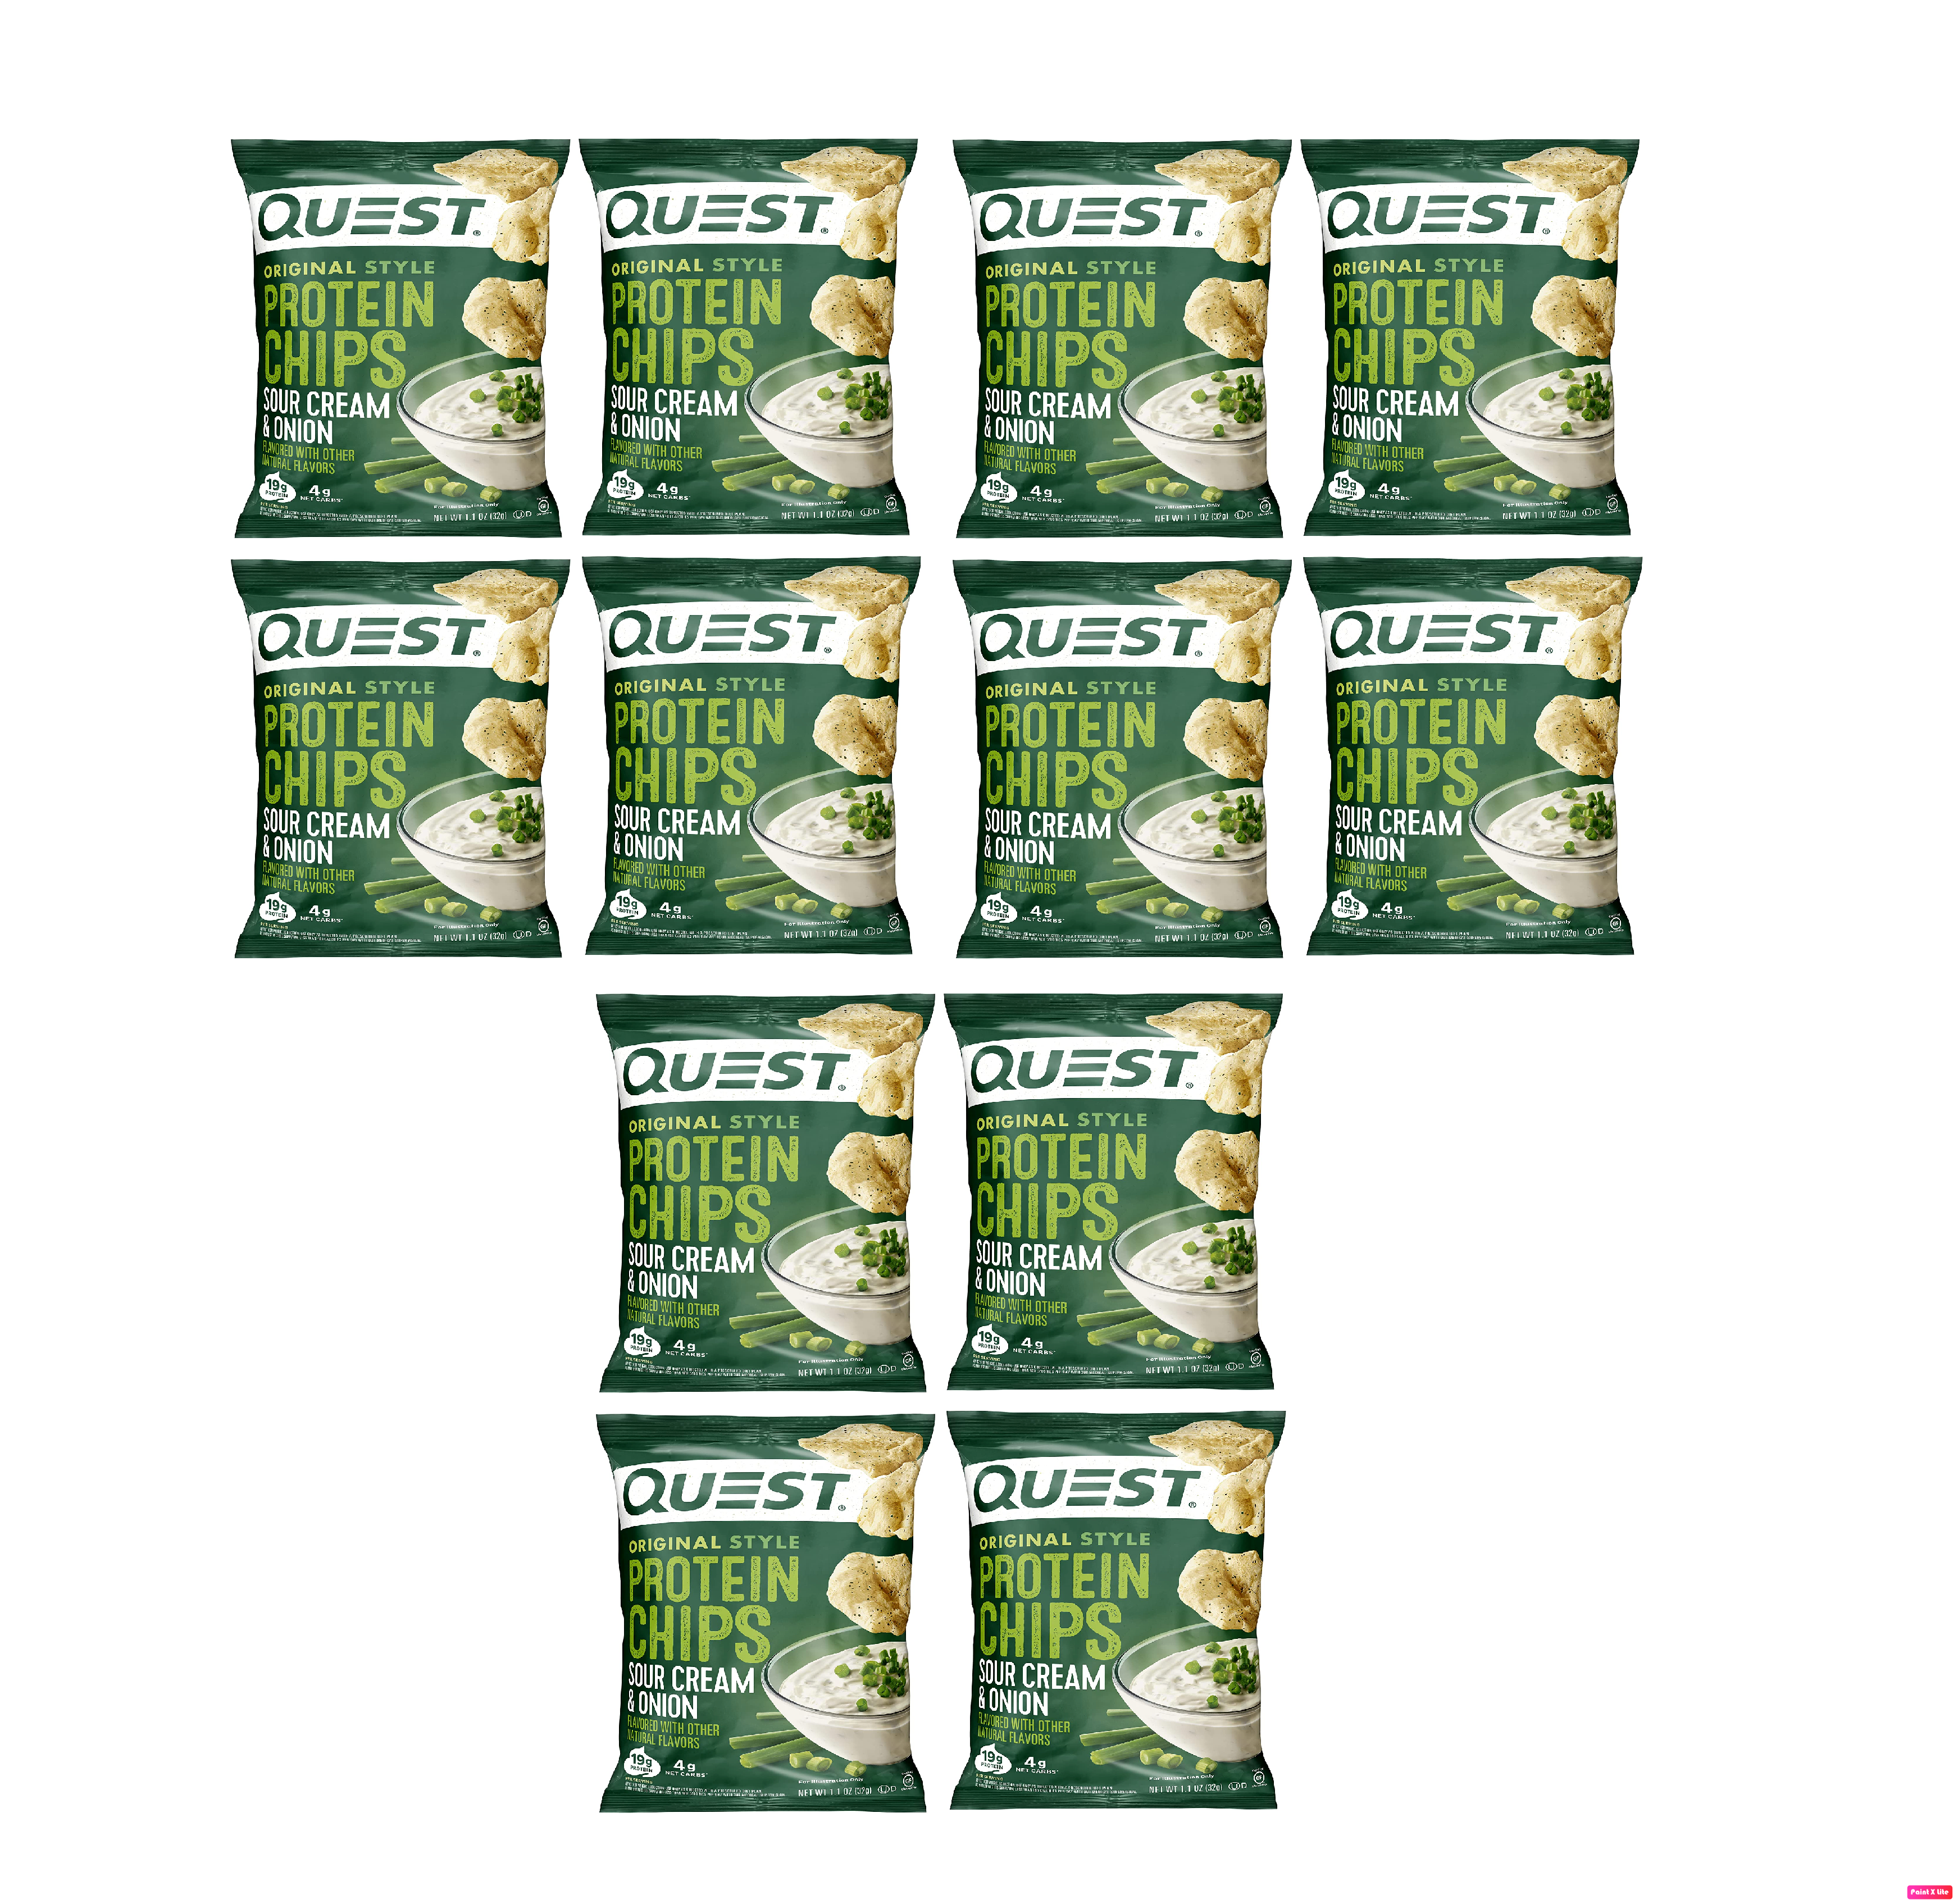 #Size_12-Pack (12 bags)